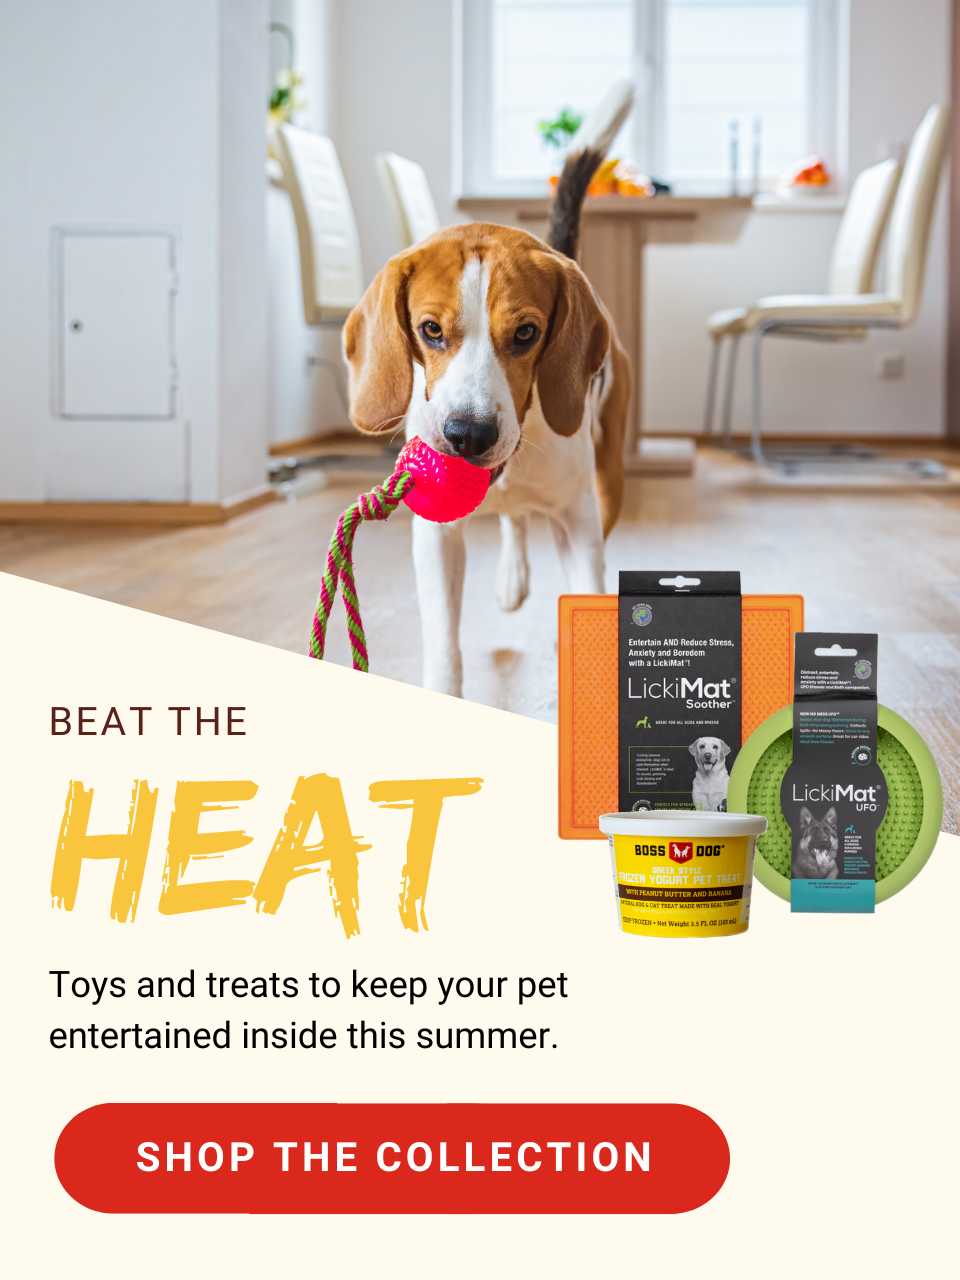 Beat the heat with toys and treats that will keep your pet entertained inside this summer! Shop the collection